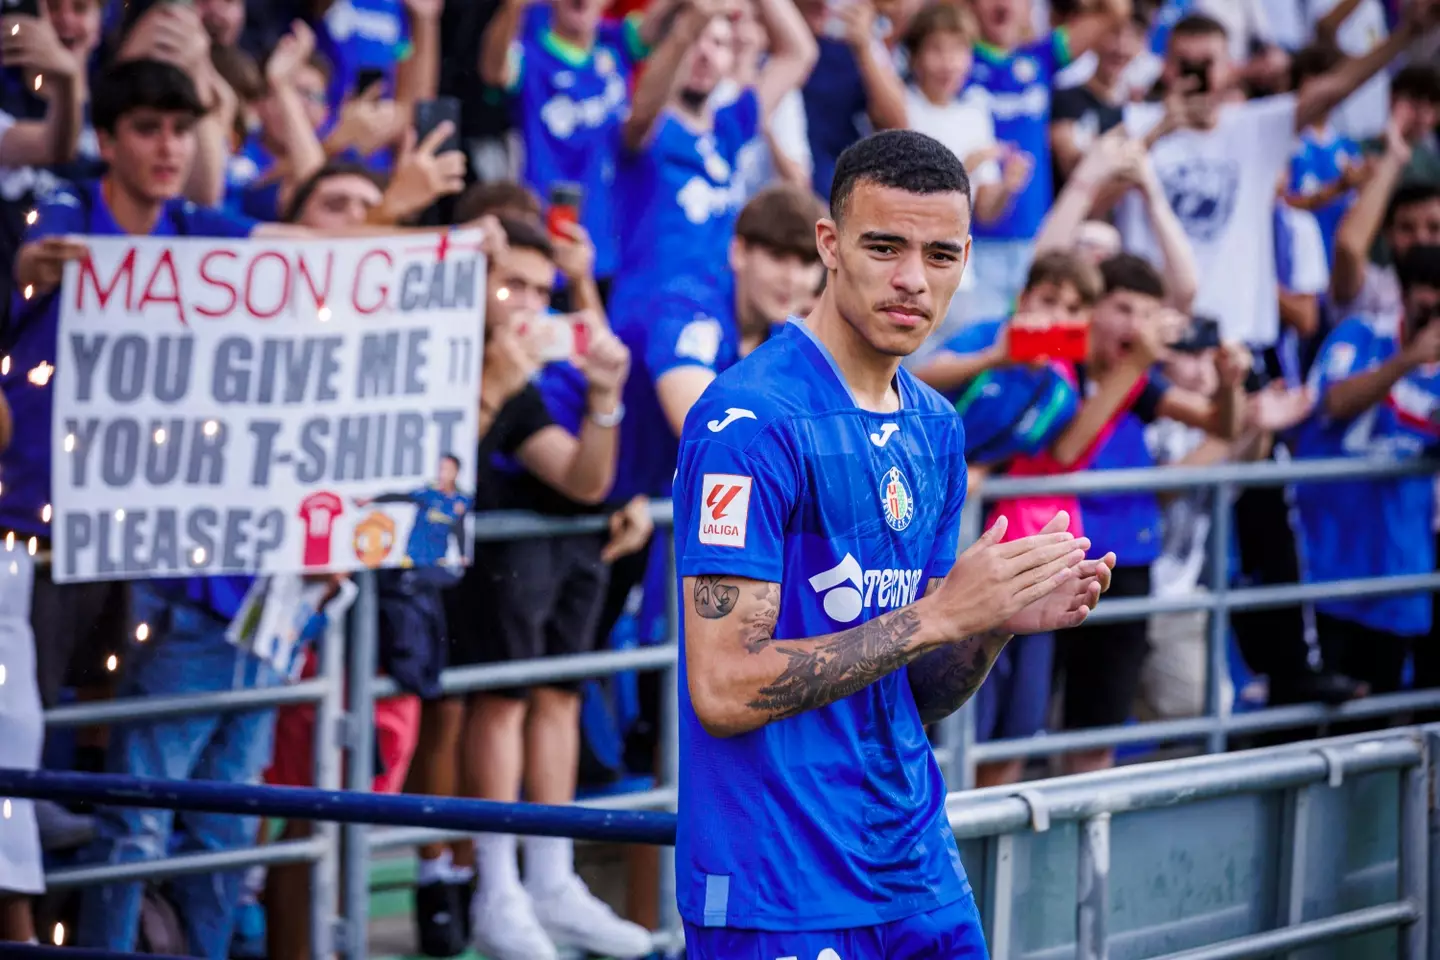 Mason Greenwood welcomed by Getafe fans. Image: Getty